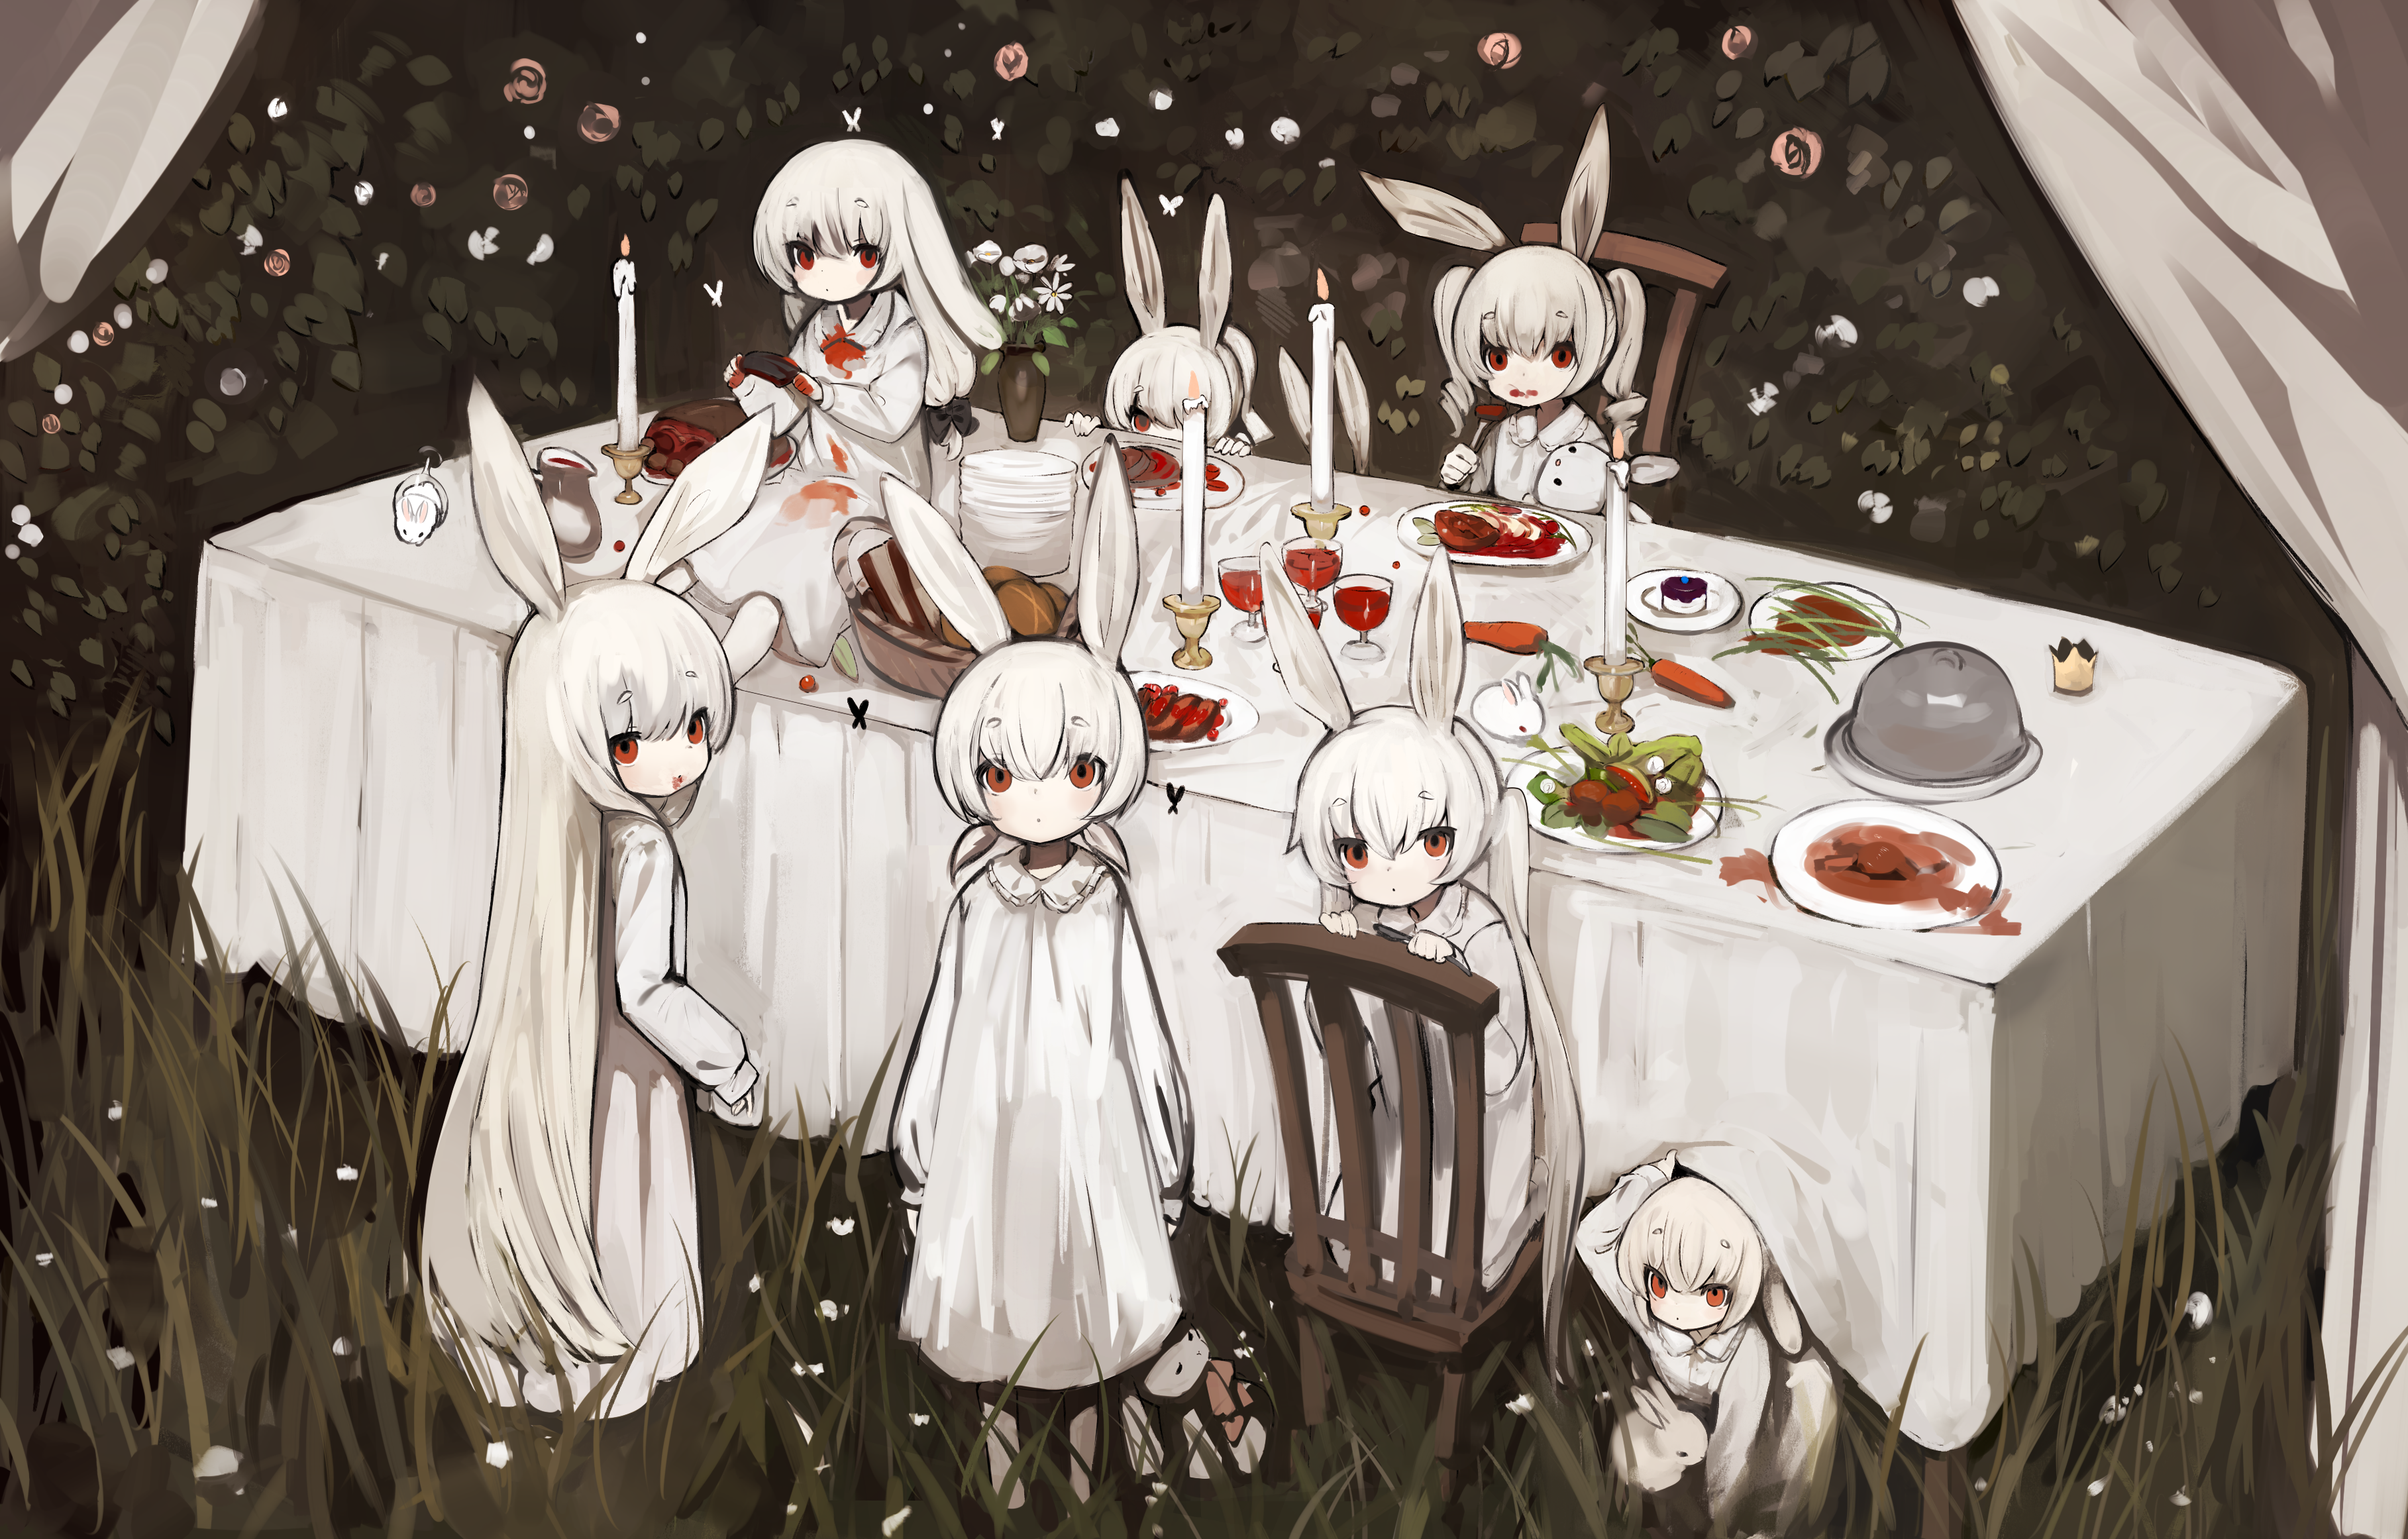 Anime Anime Girls Blonde Long Hair Bunny Ears Red Eyes Table Eating Chair Meat Wine Glass Candles Gr 3635x2323